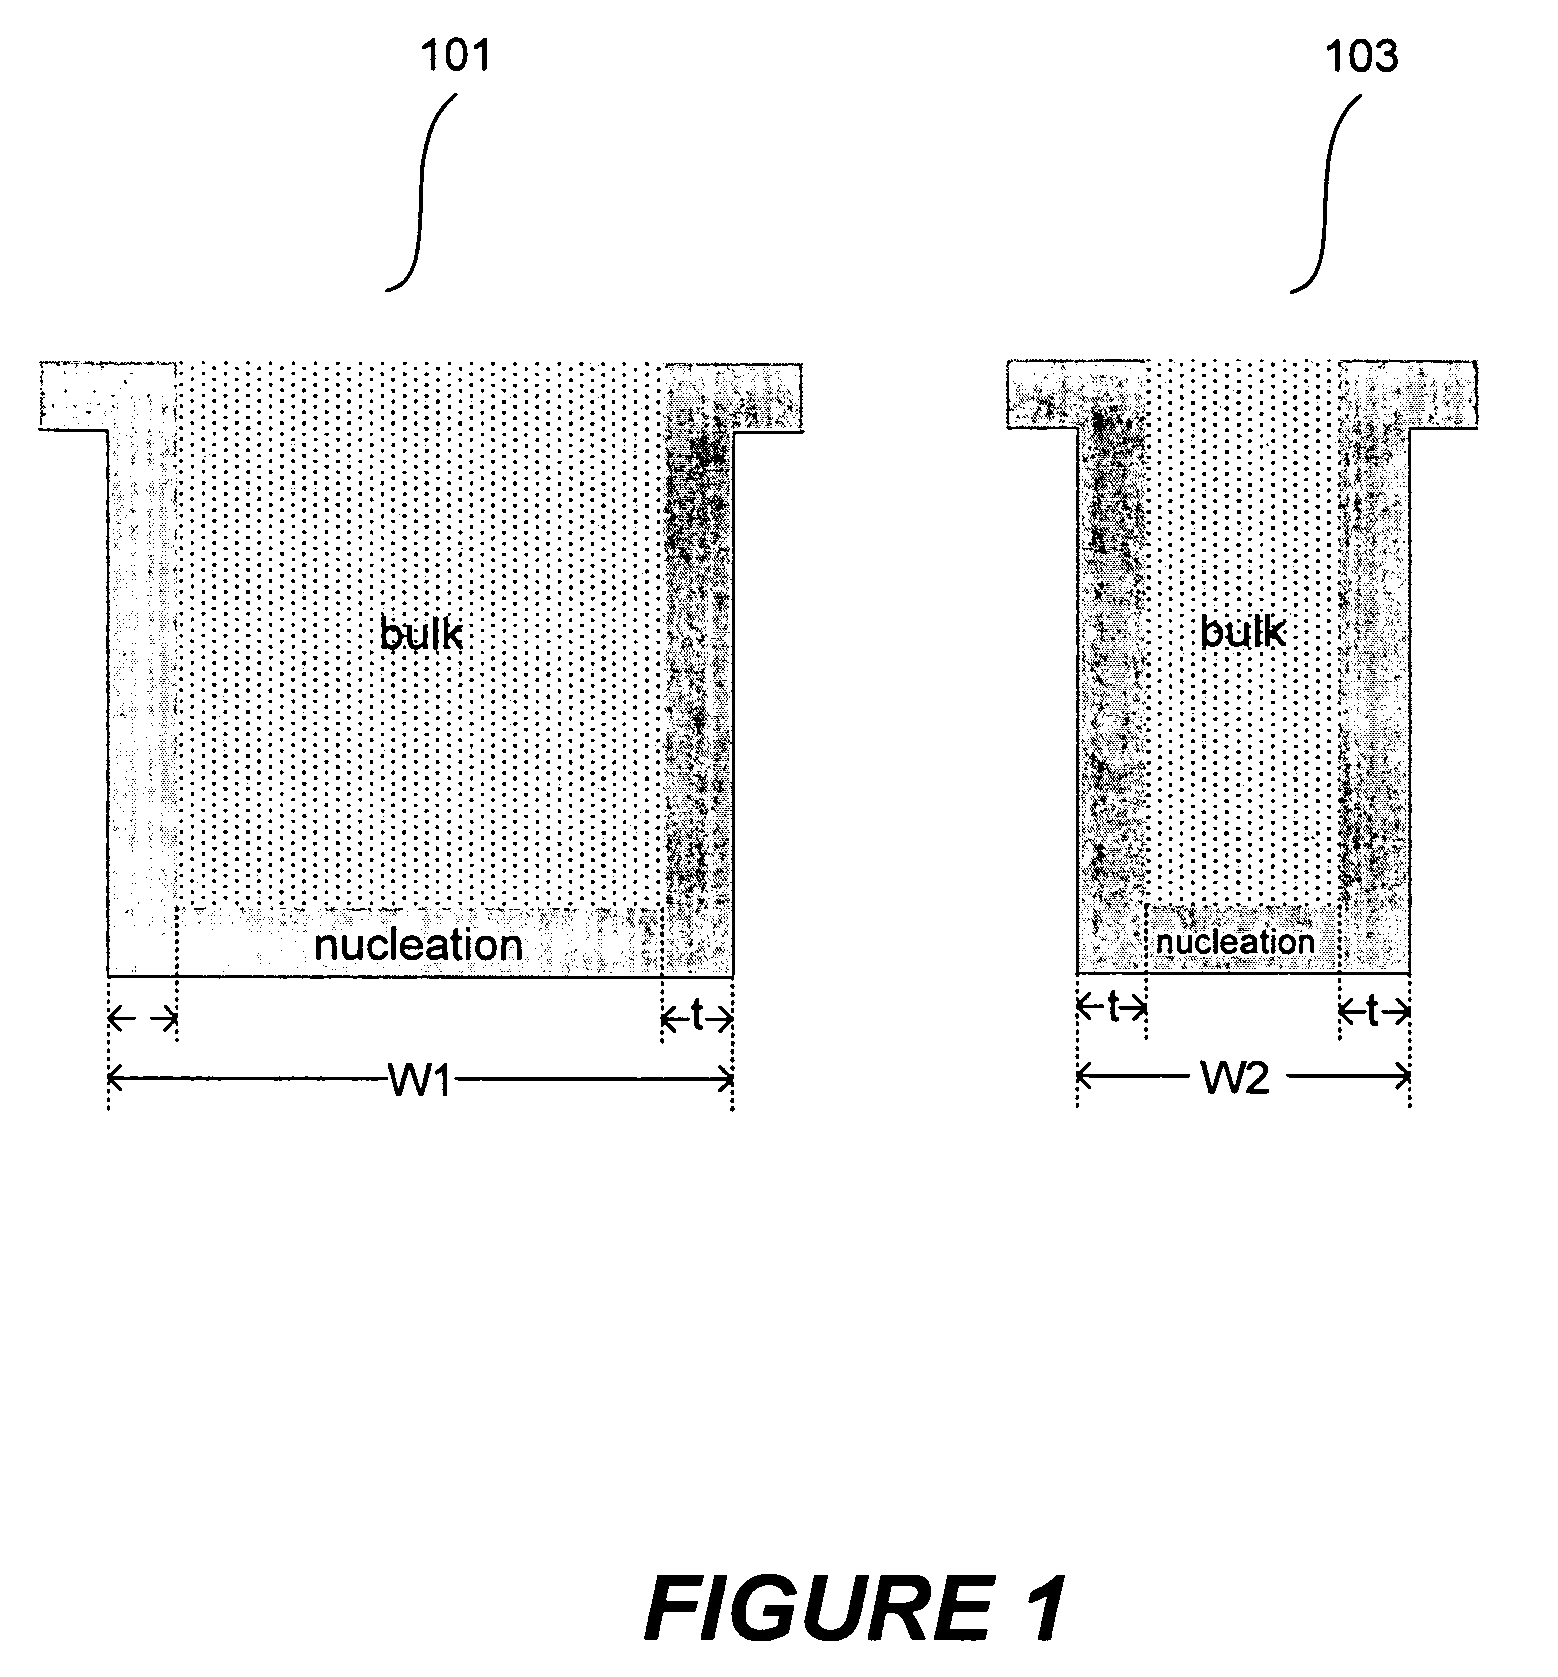 Method for depositing thin tungsten film with low resistivity and robust micro-adhesion characteristics